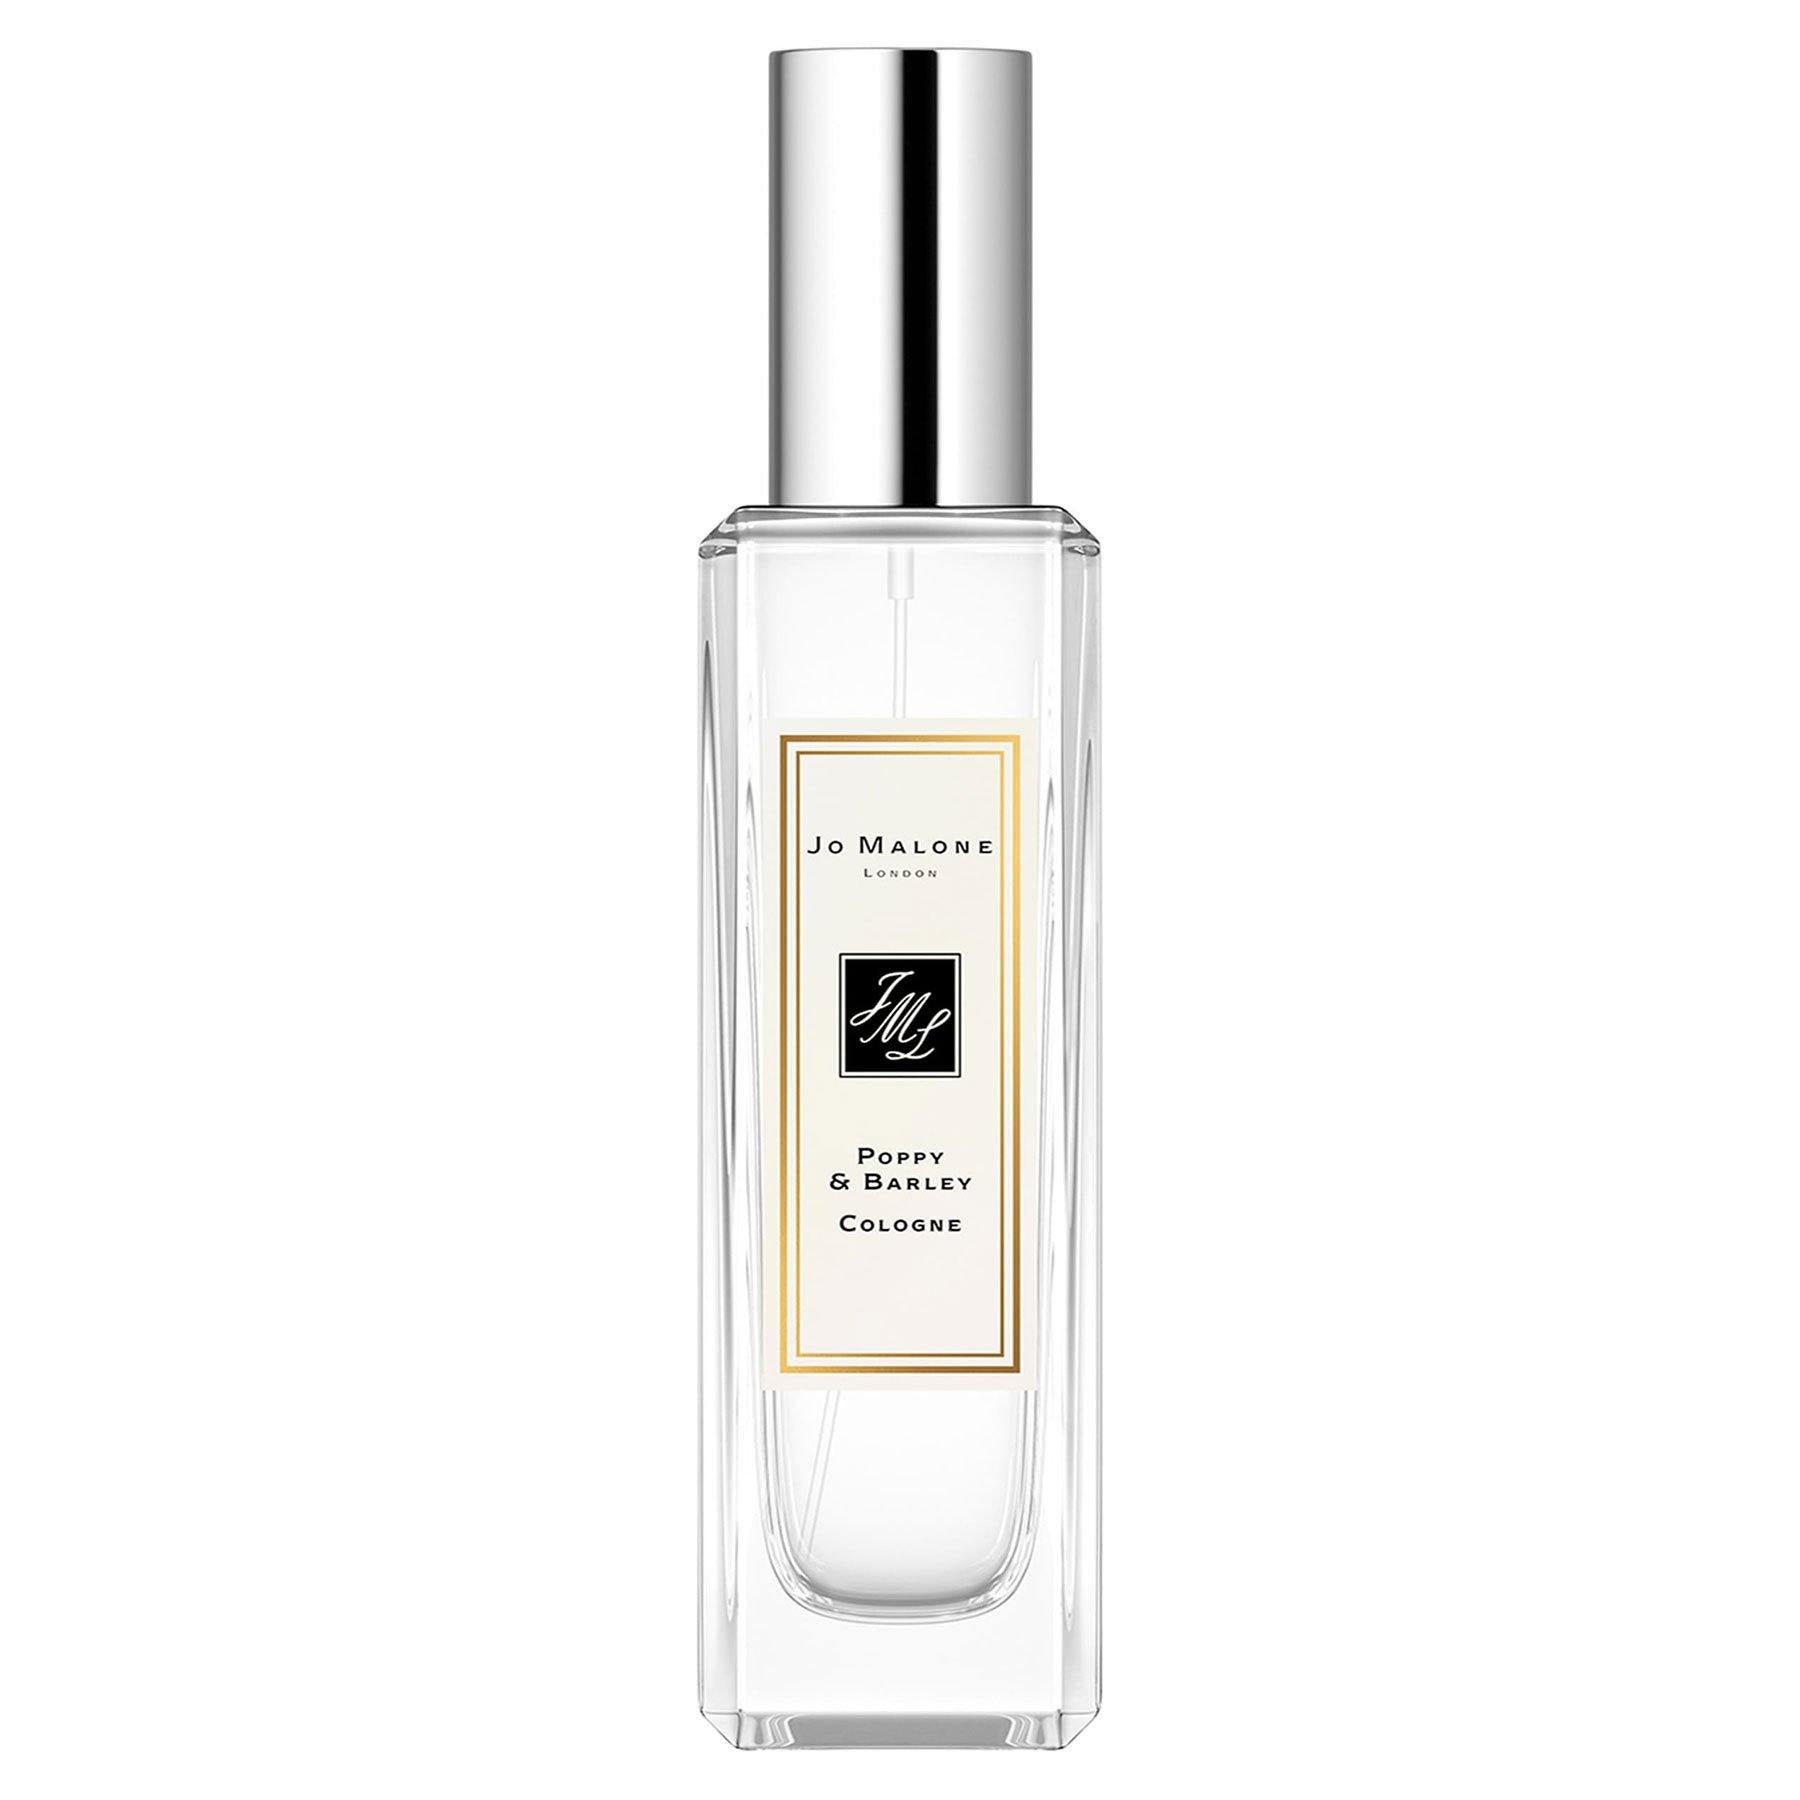 Poppy & Barley Cologne - Cosmos Boutique New Jersey